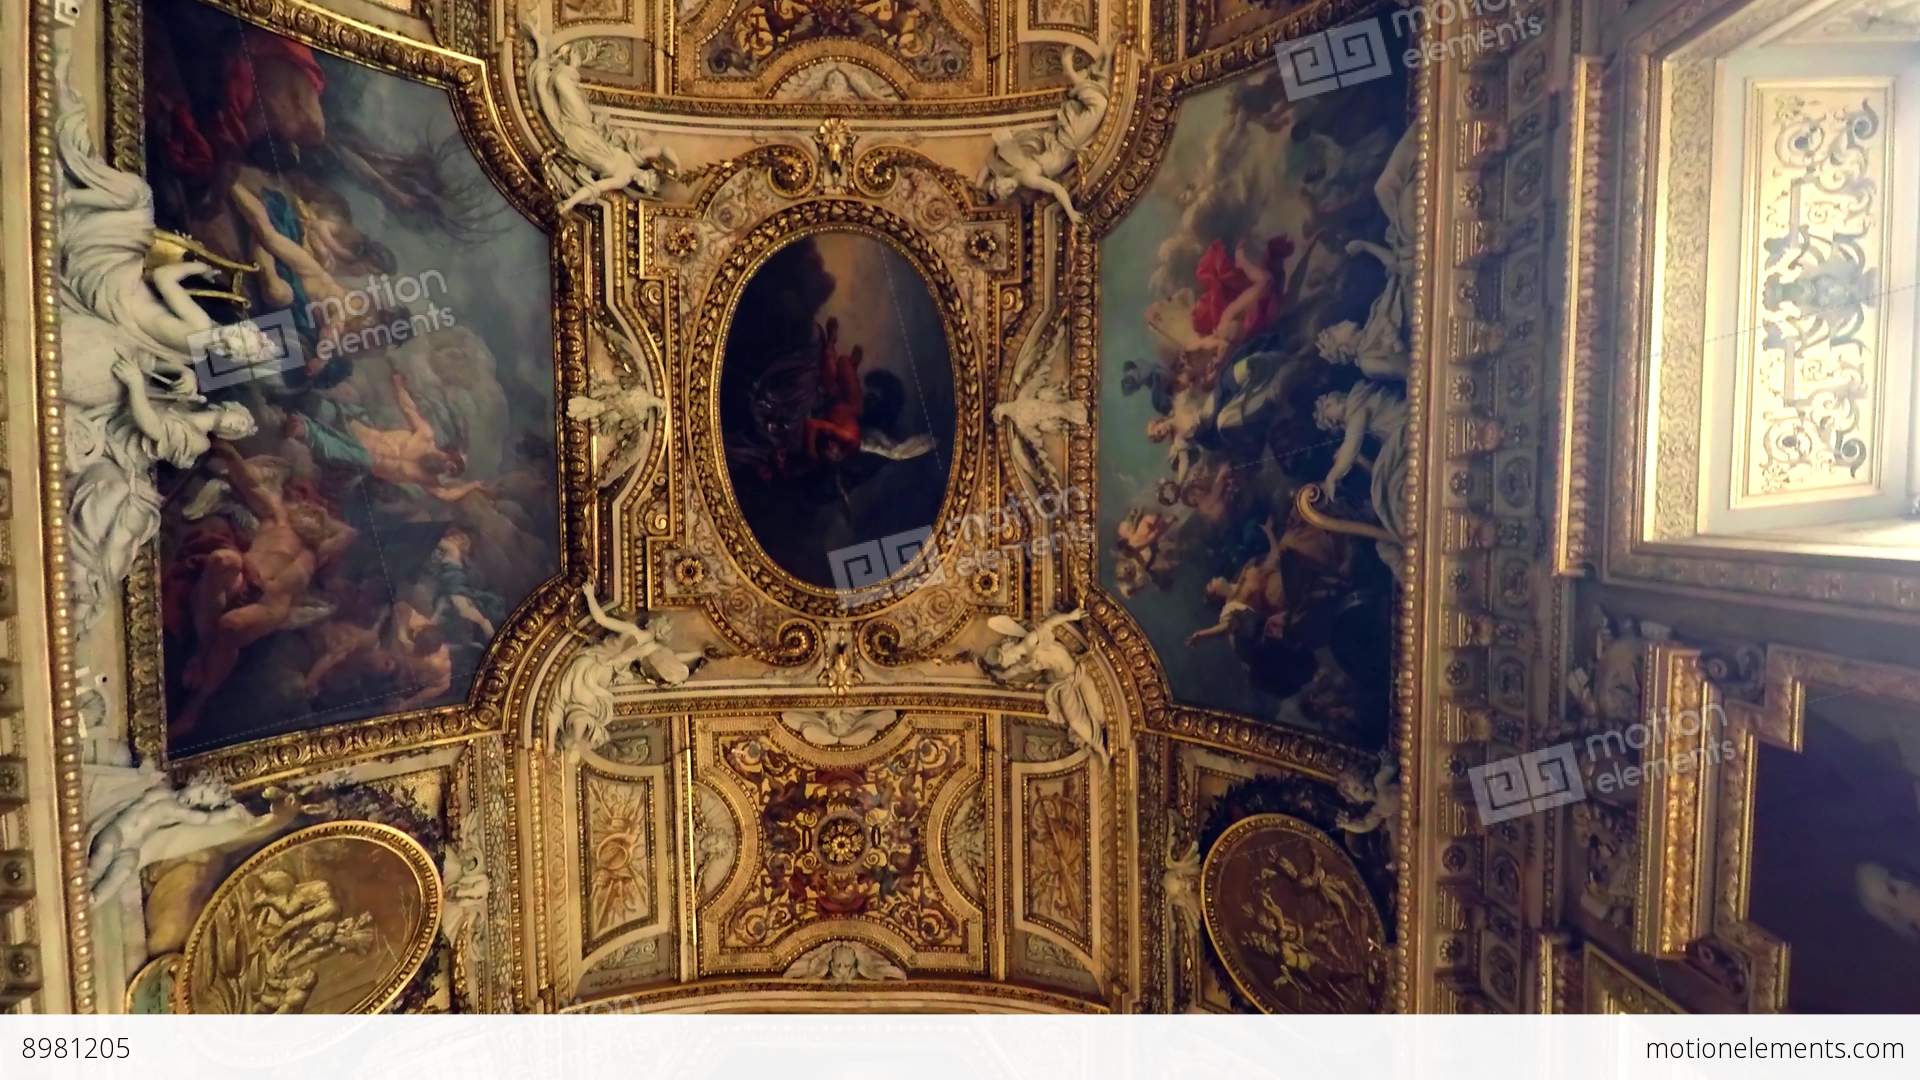 Magnificent Painted Ceilings In The Louvre Museum In Paris. France